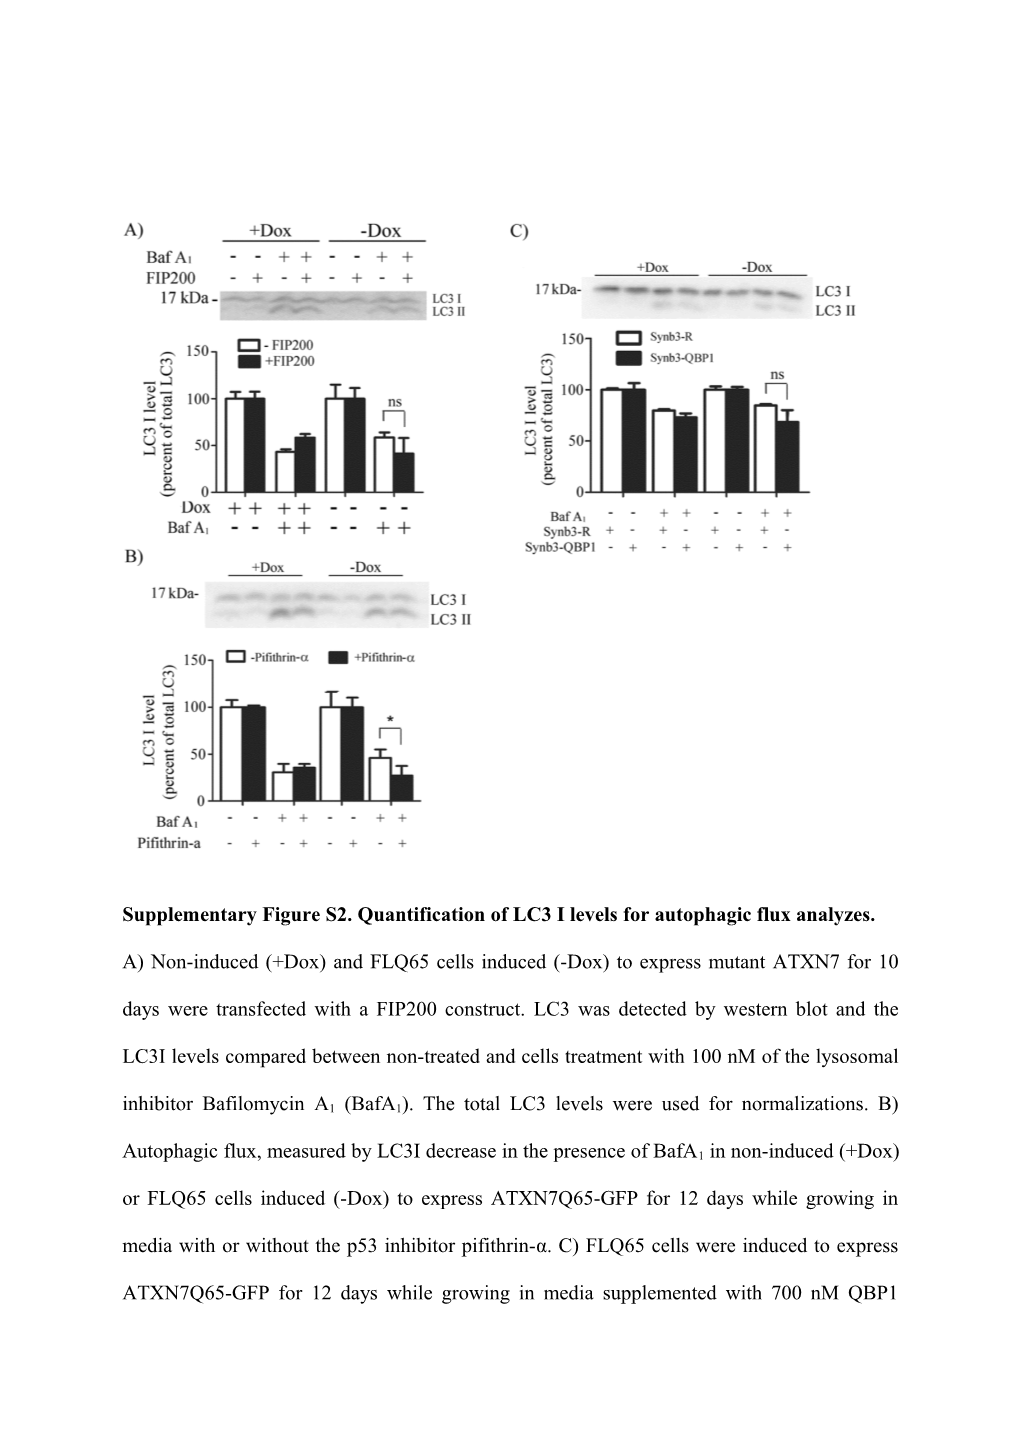 Supplementary Figure S1.Aggregation Analysis of ATXN7 in FLQ10 and FLQ65 Cells